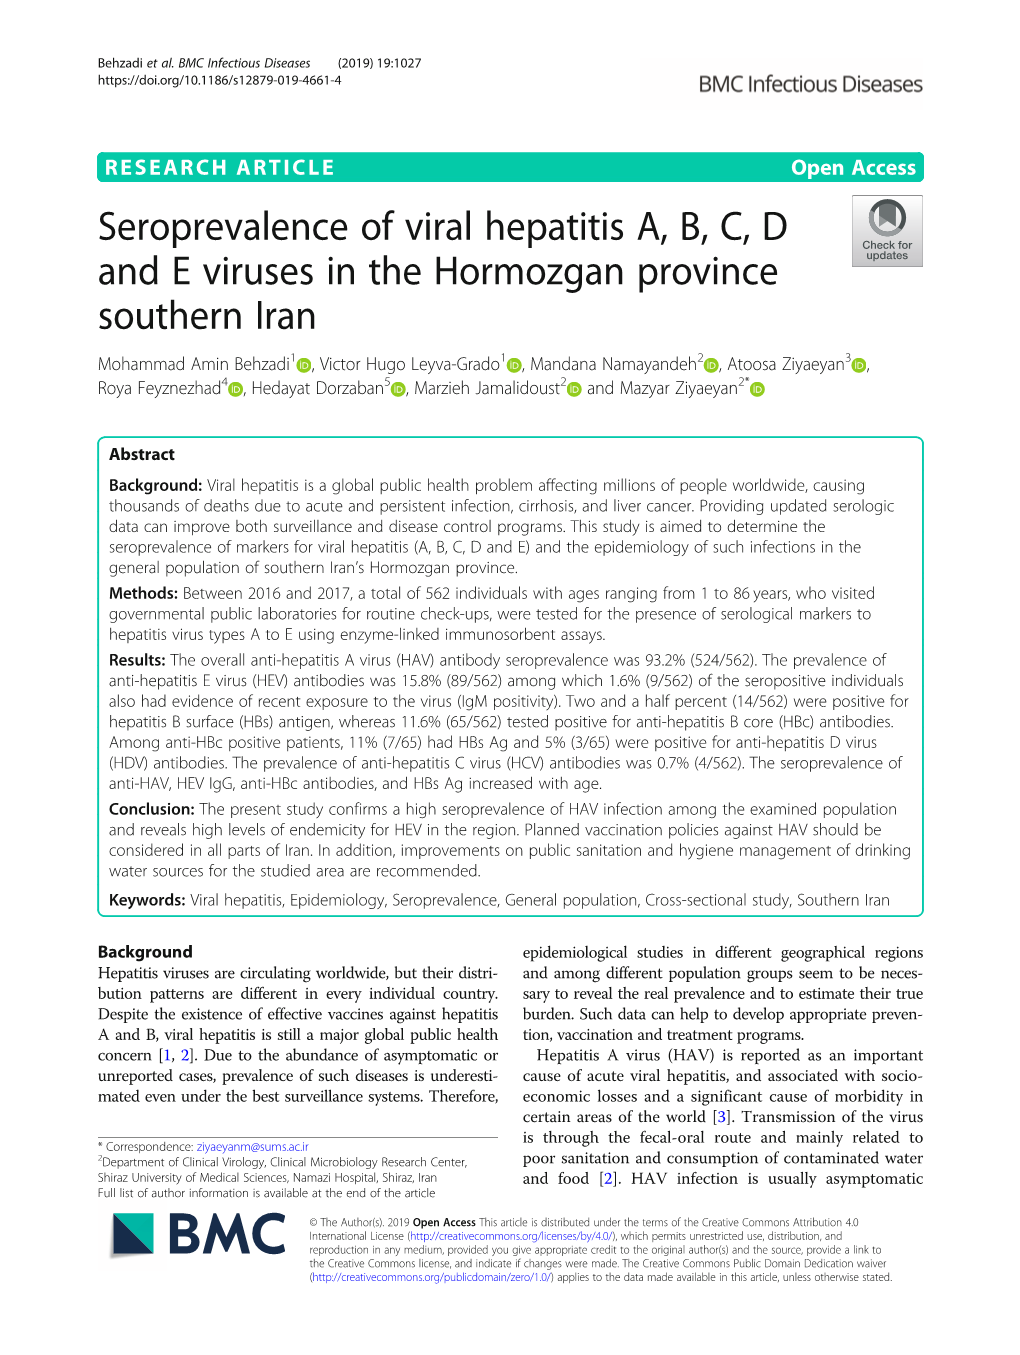 Seroprevalence of Viral Hepatitis A, B, C, D and E Viruses in The